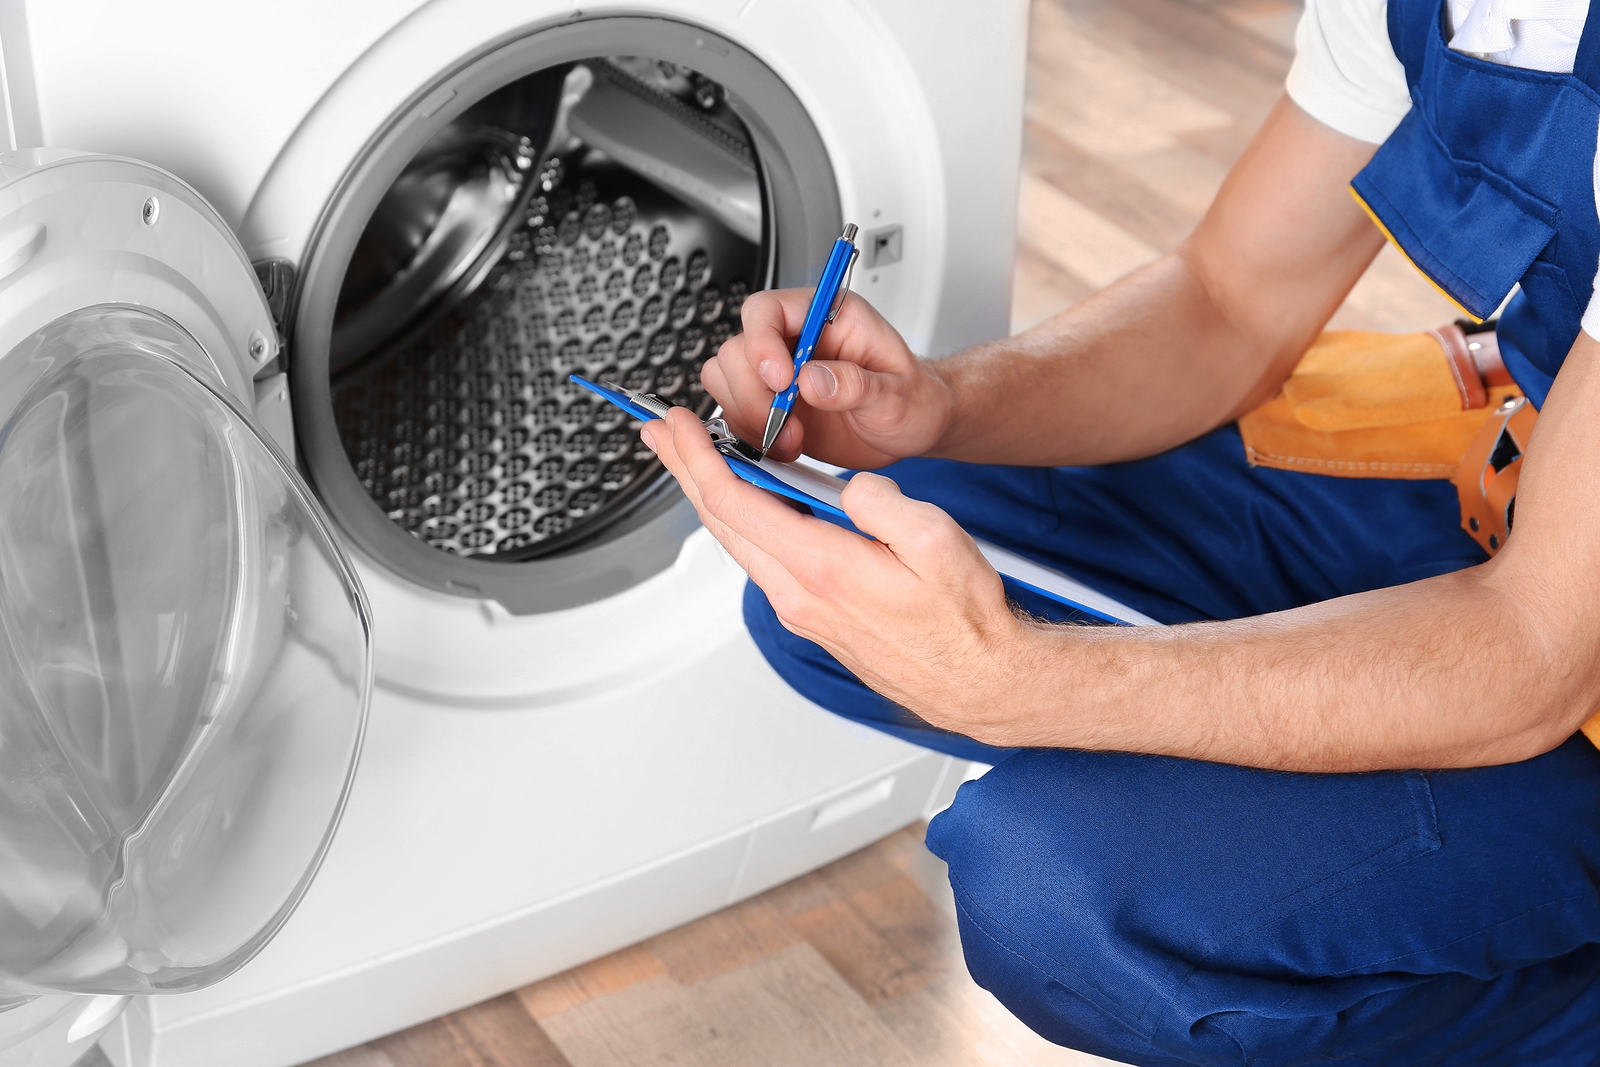 What to Look for When Hiring an Appliance Repair Service